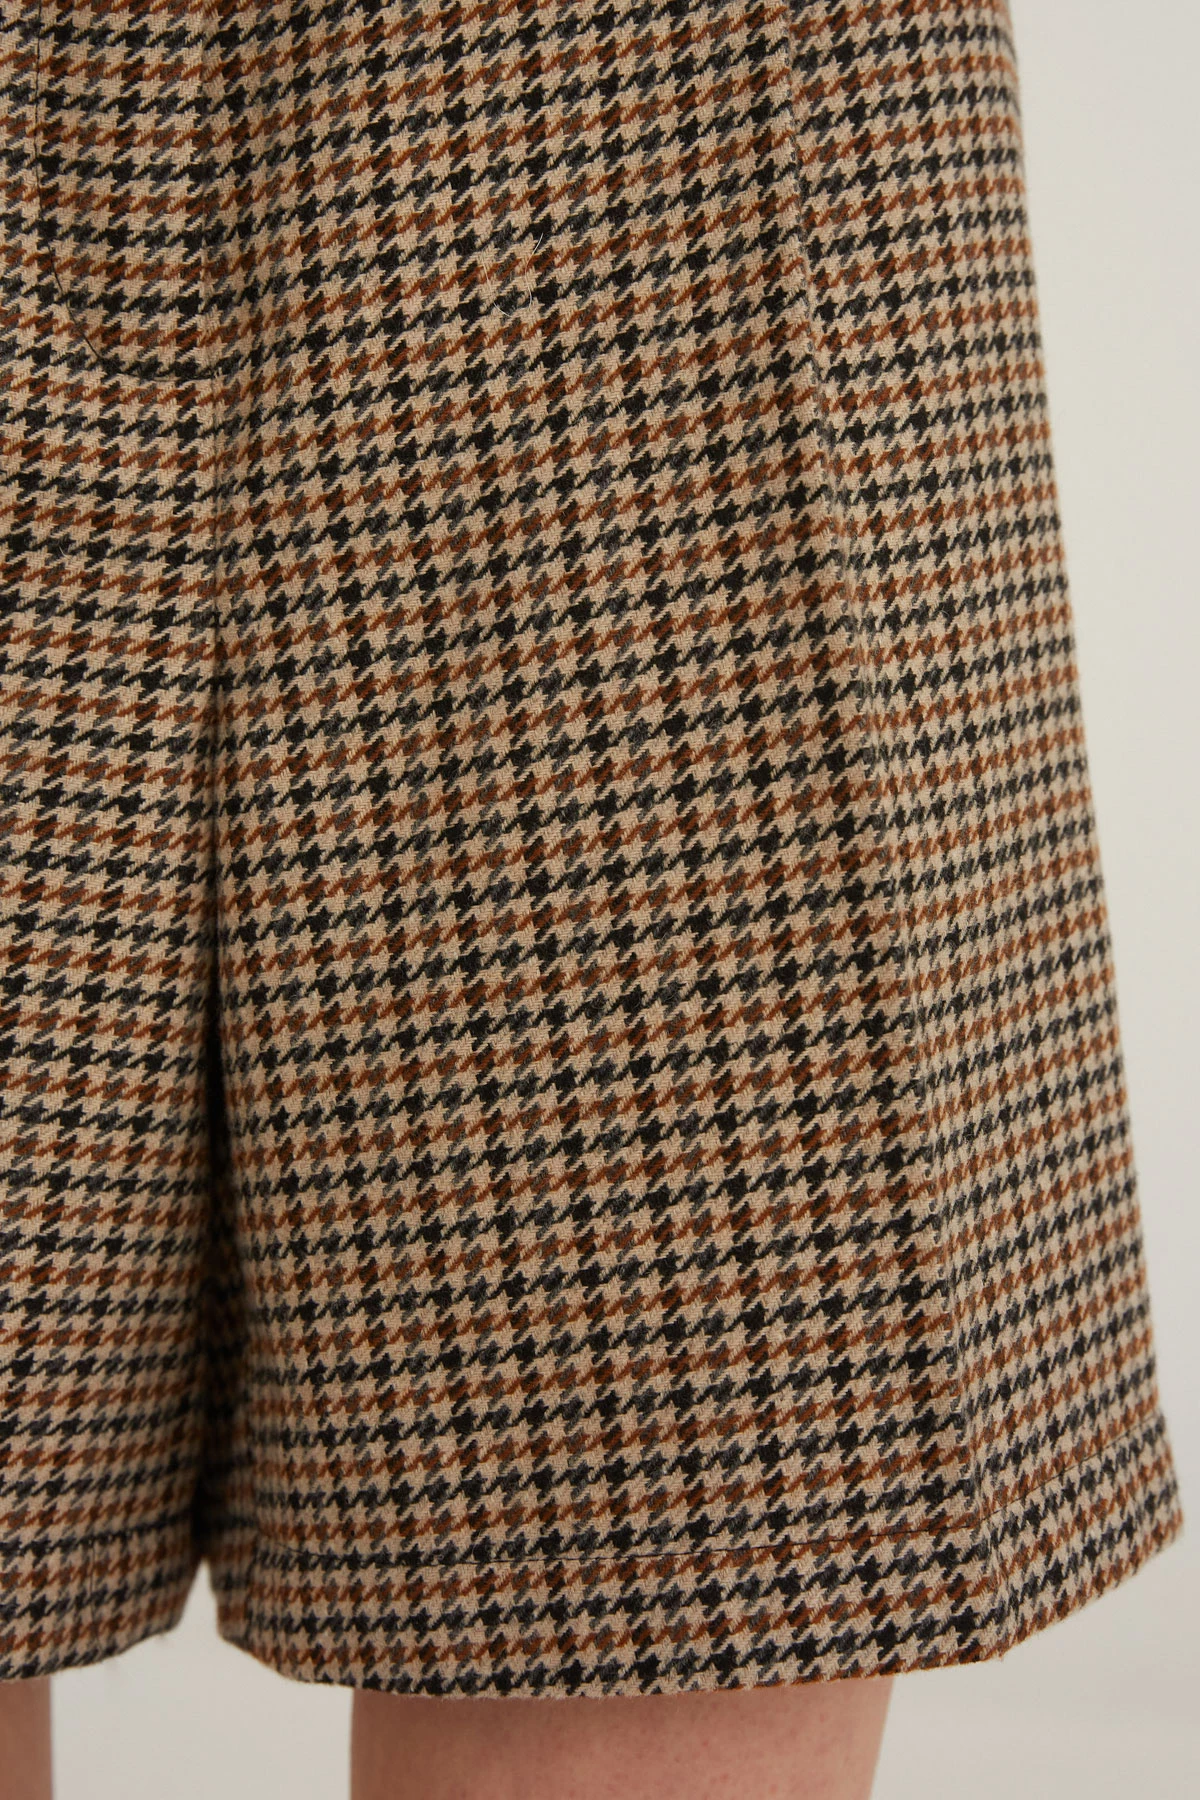 Straight-cut elongetaed shorts in houndstooth pattern with wool, photo 4